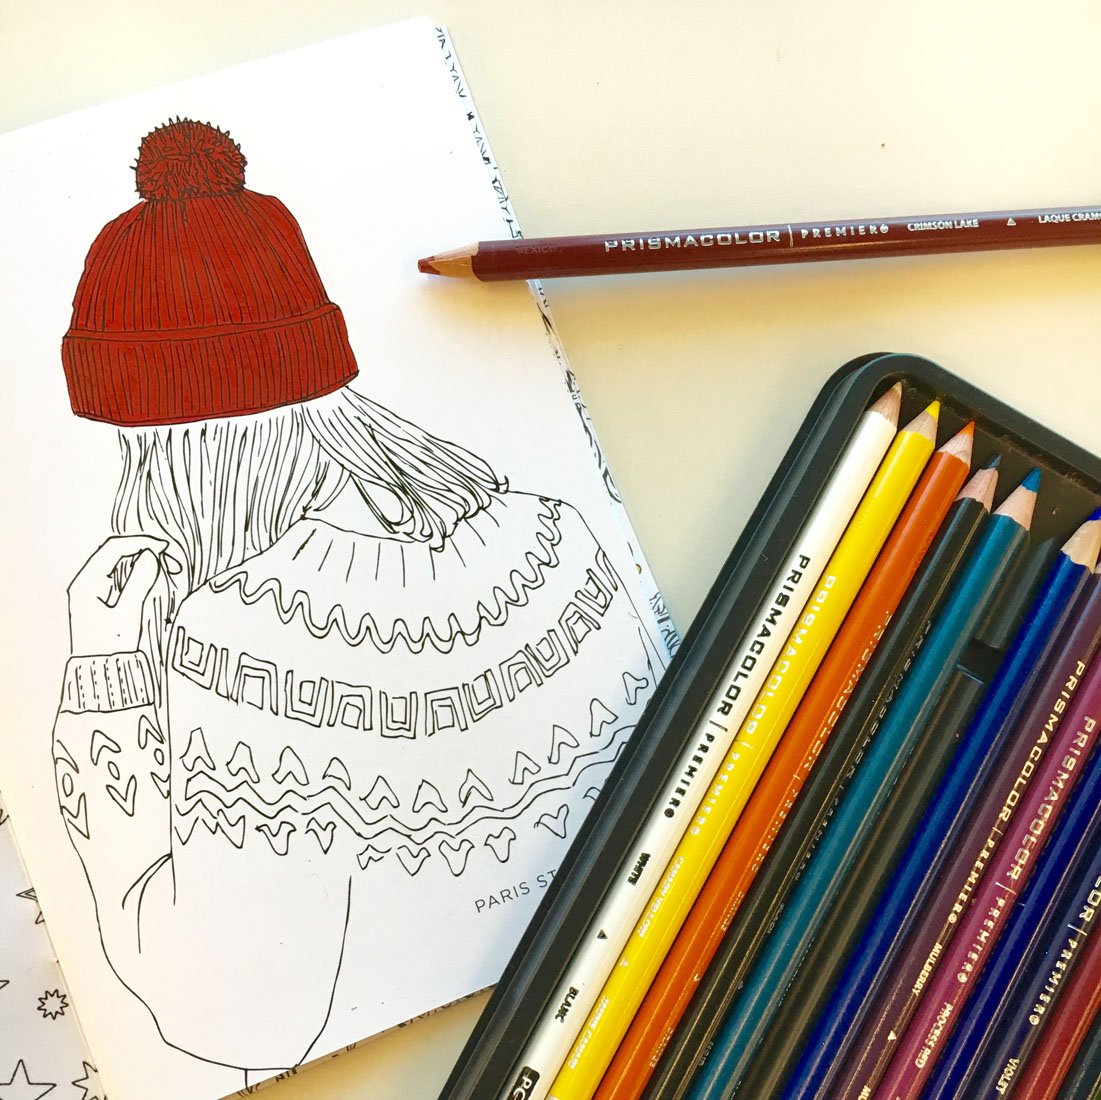 https://s7d9.scene7.com/is/image/NewellRubbermaid/prismacolor-adult-coloring-book-with-red-hat?fmt=jpeg